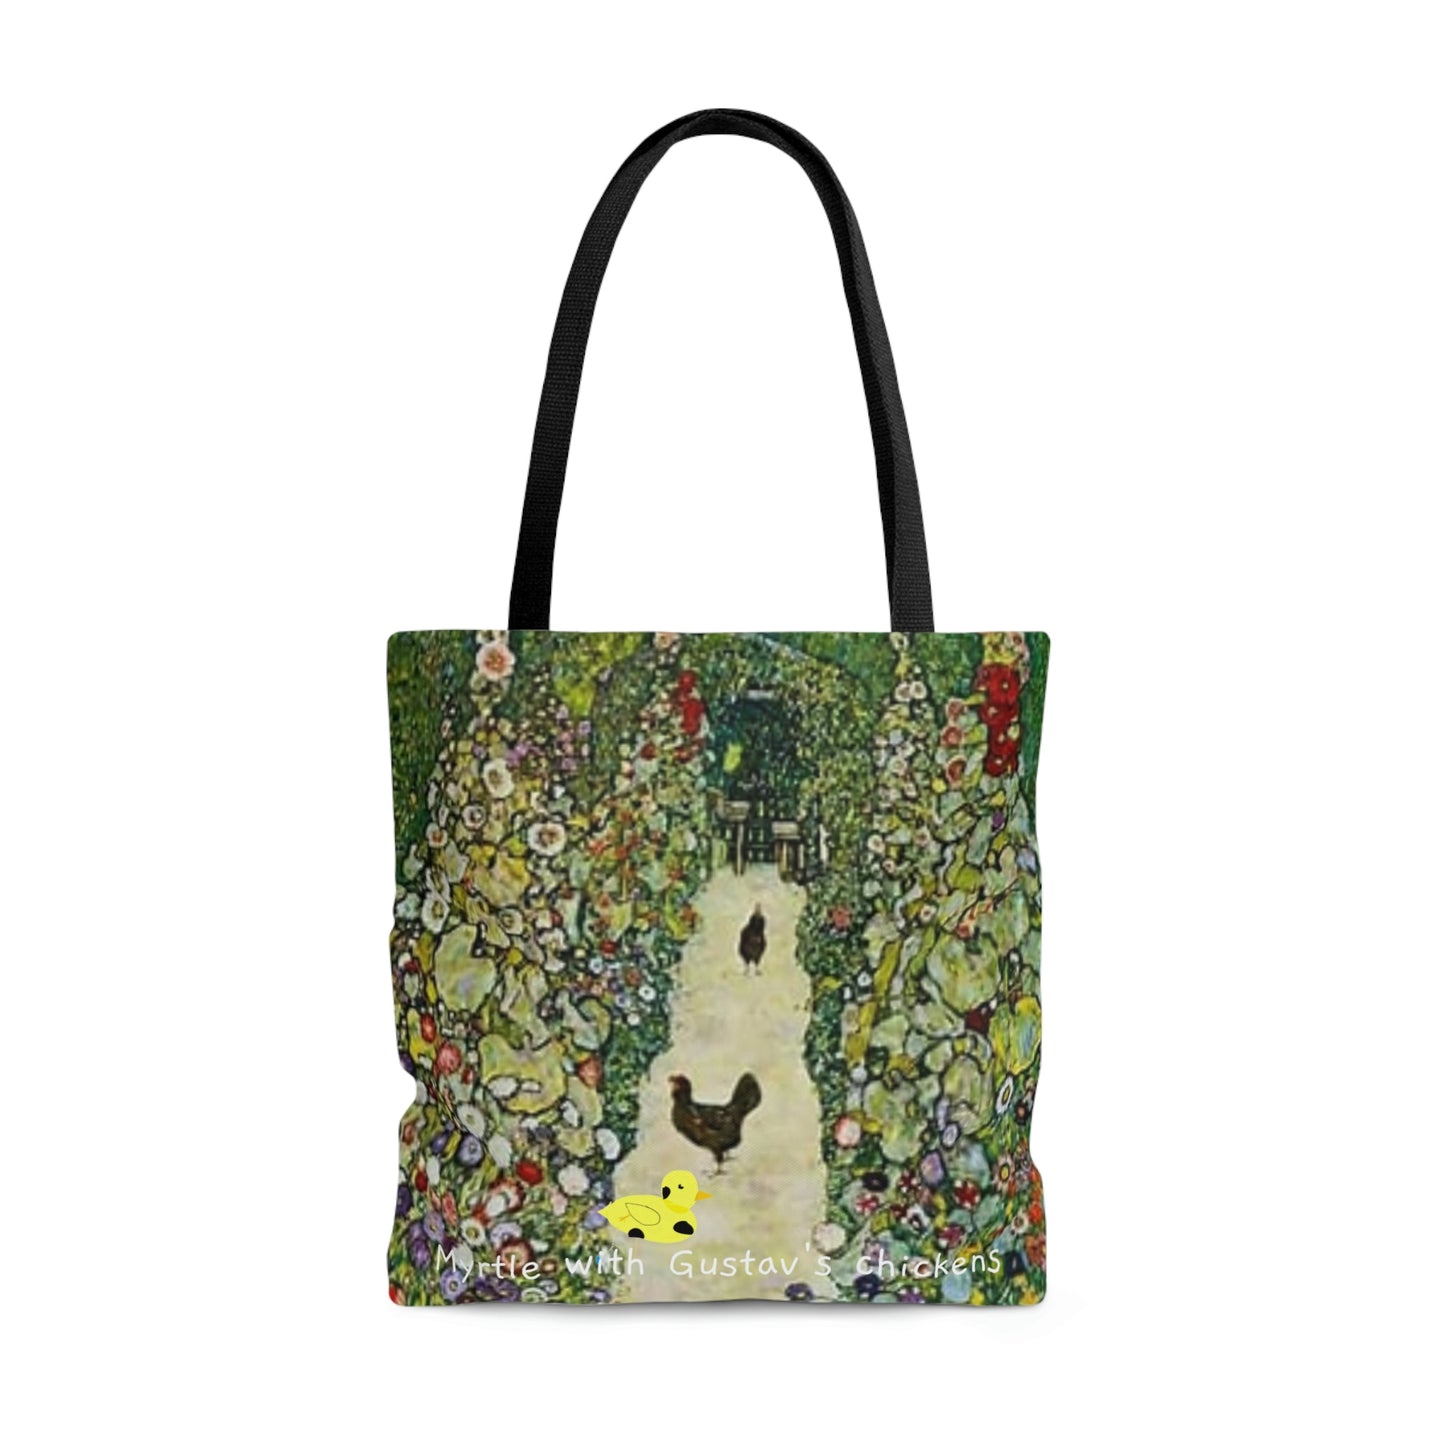 Myrtle and Gustav's Chickens by DB Tote Bag